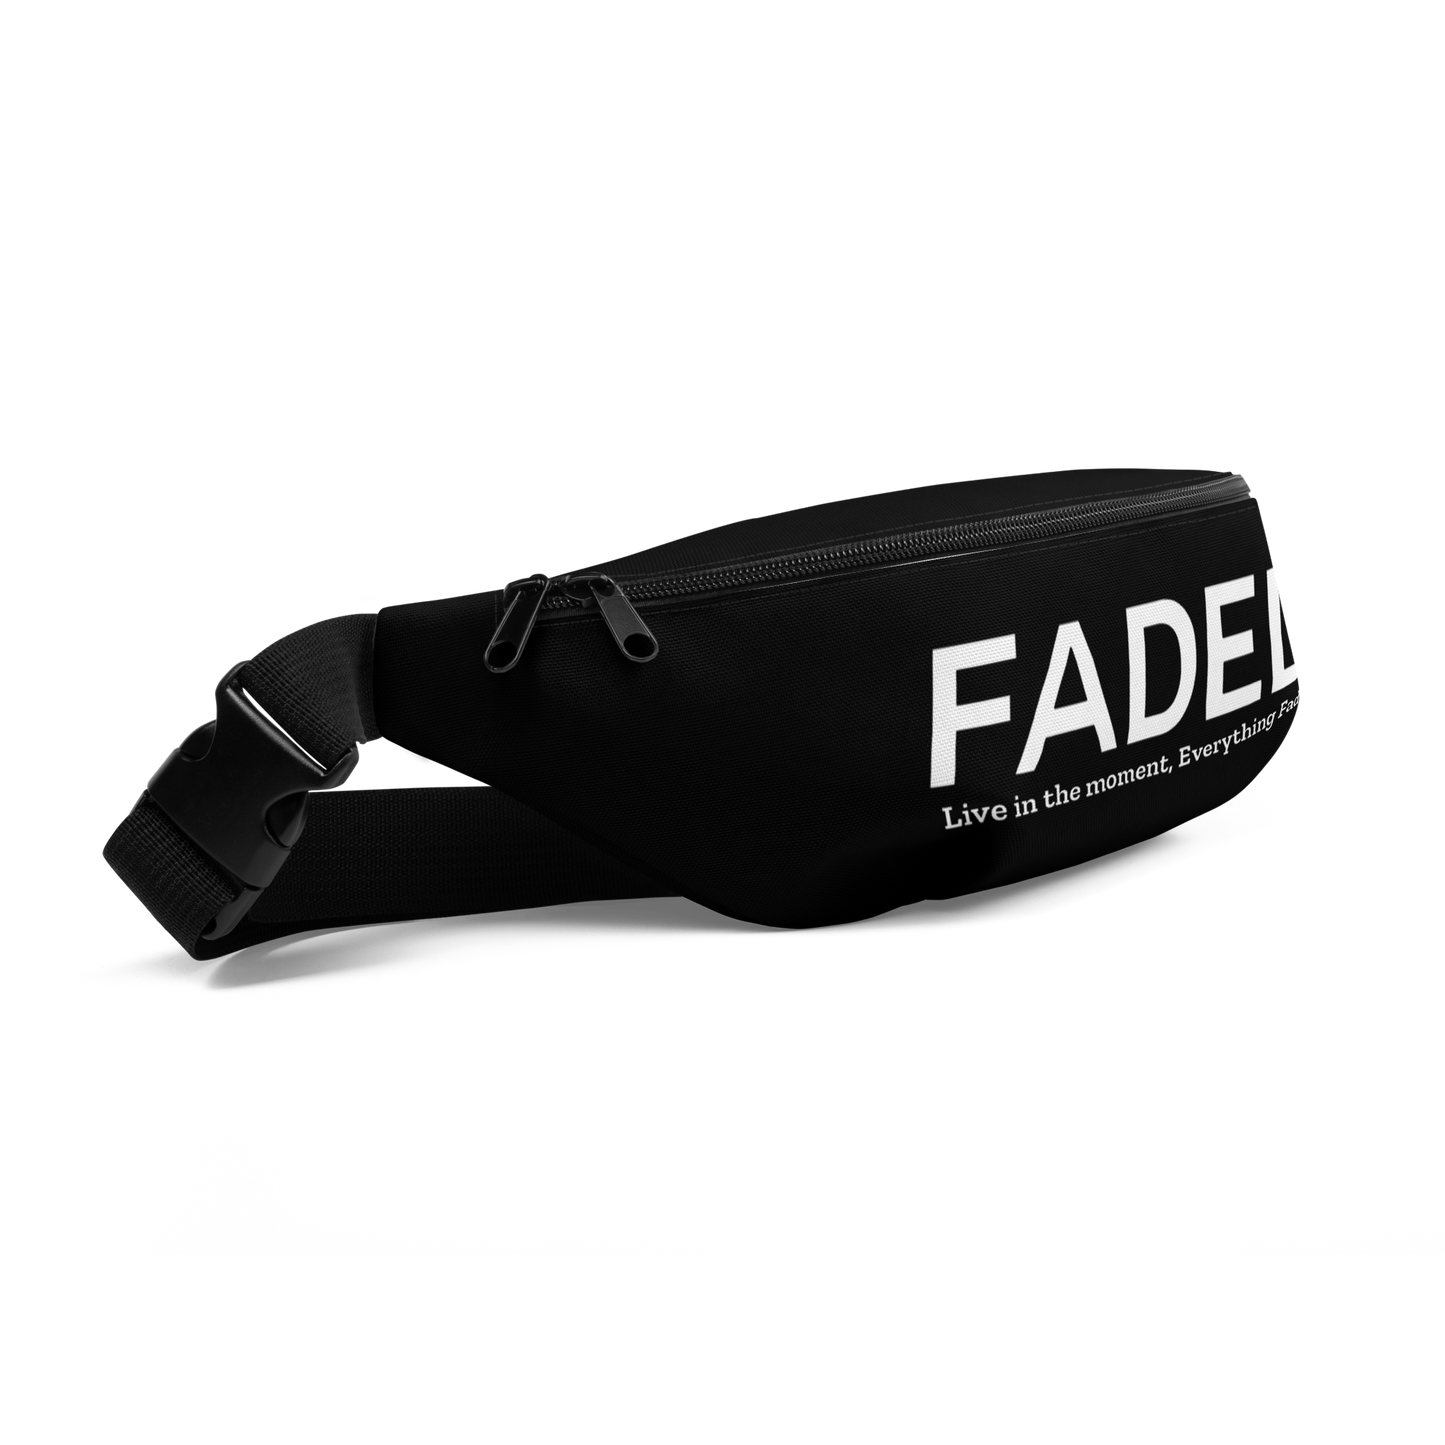 Faded "Live In The Moment" Black Fanny Pack